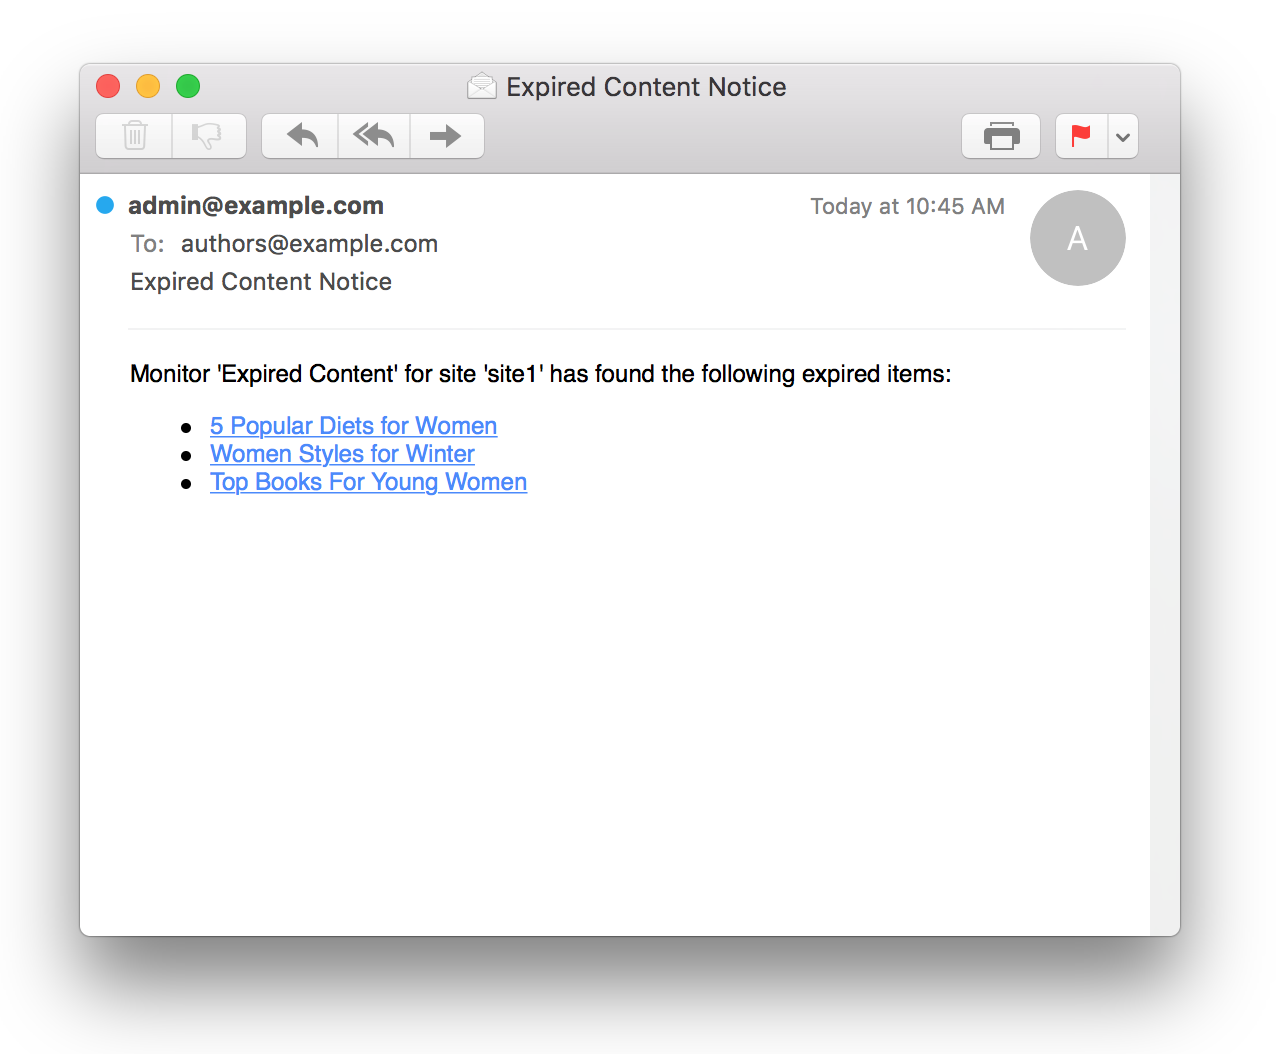 Example Content Monitor Notification Email